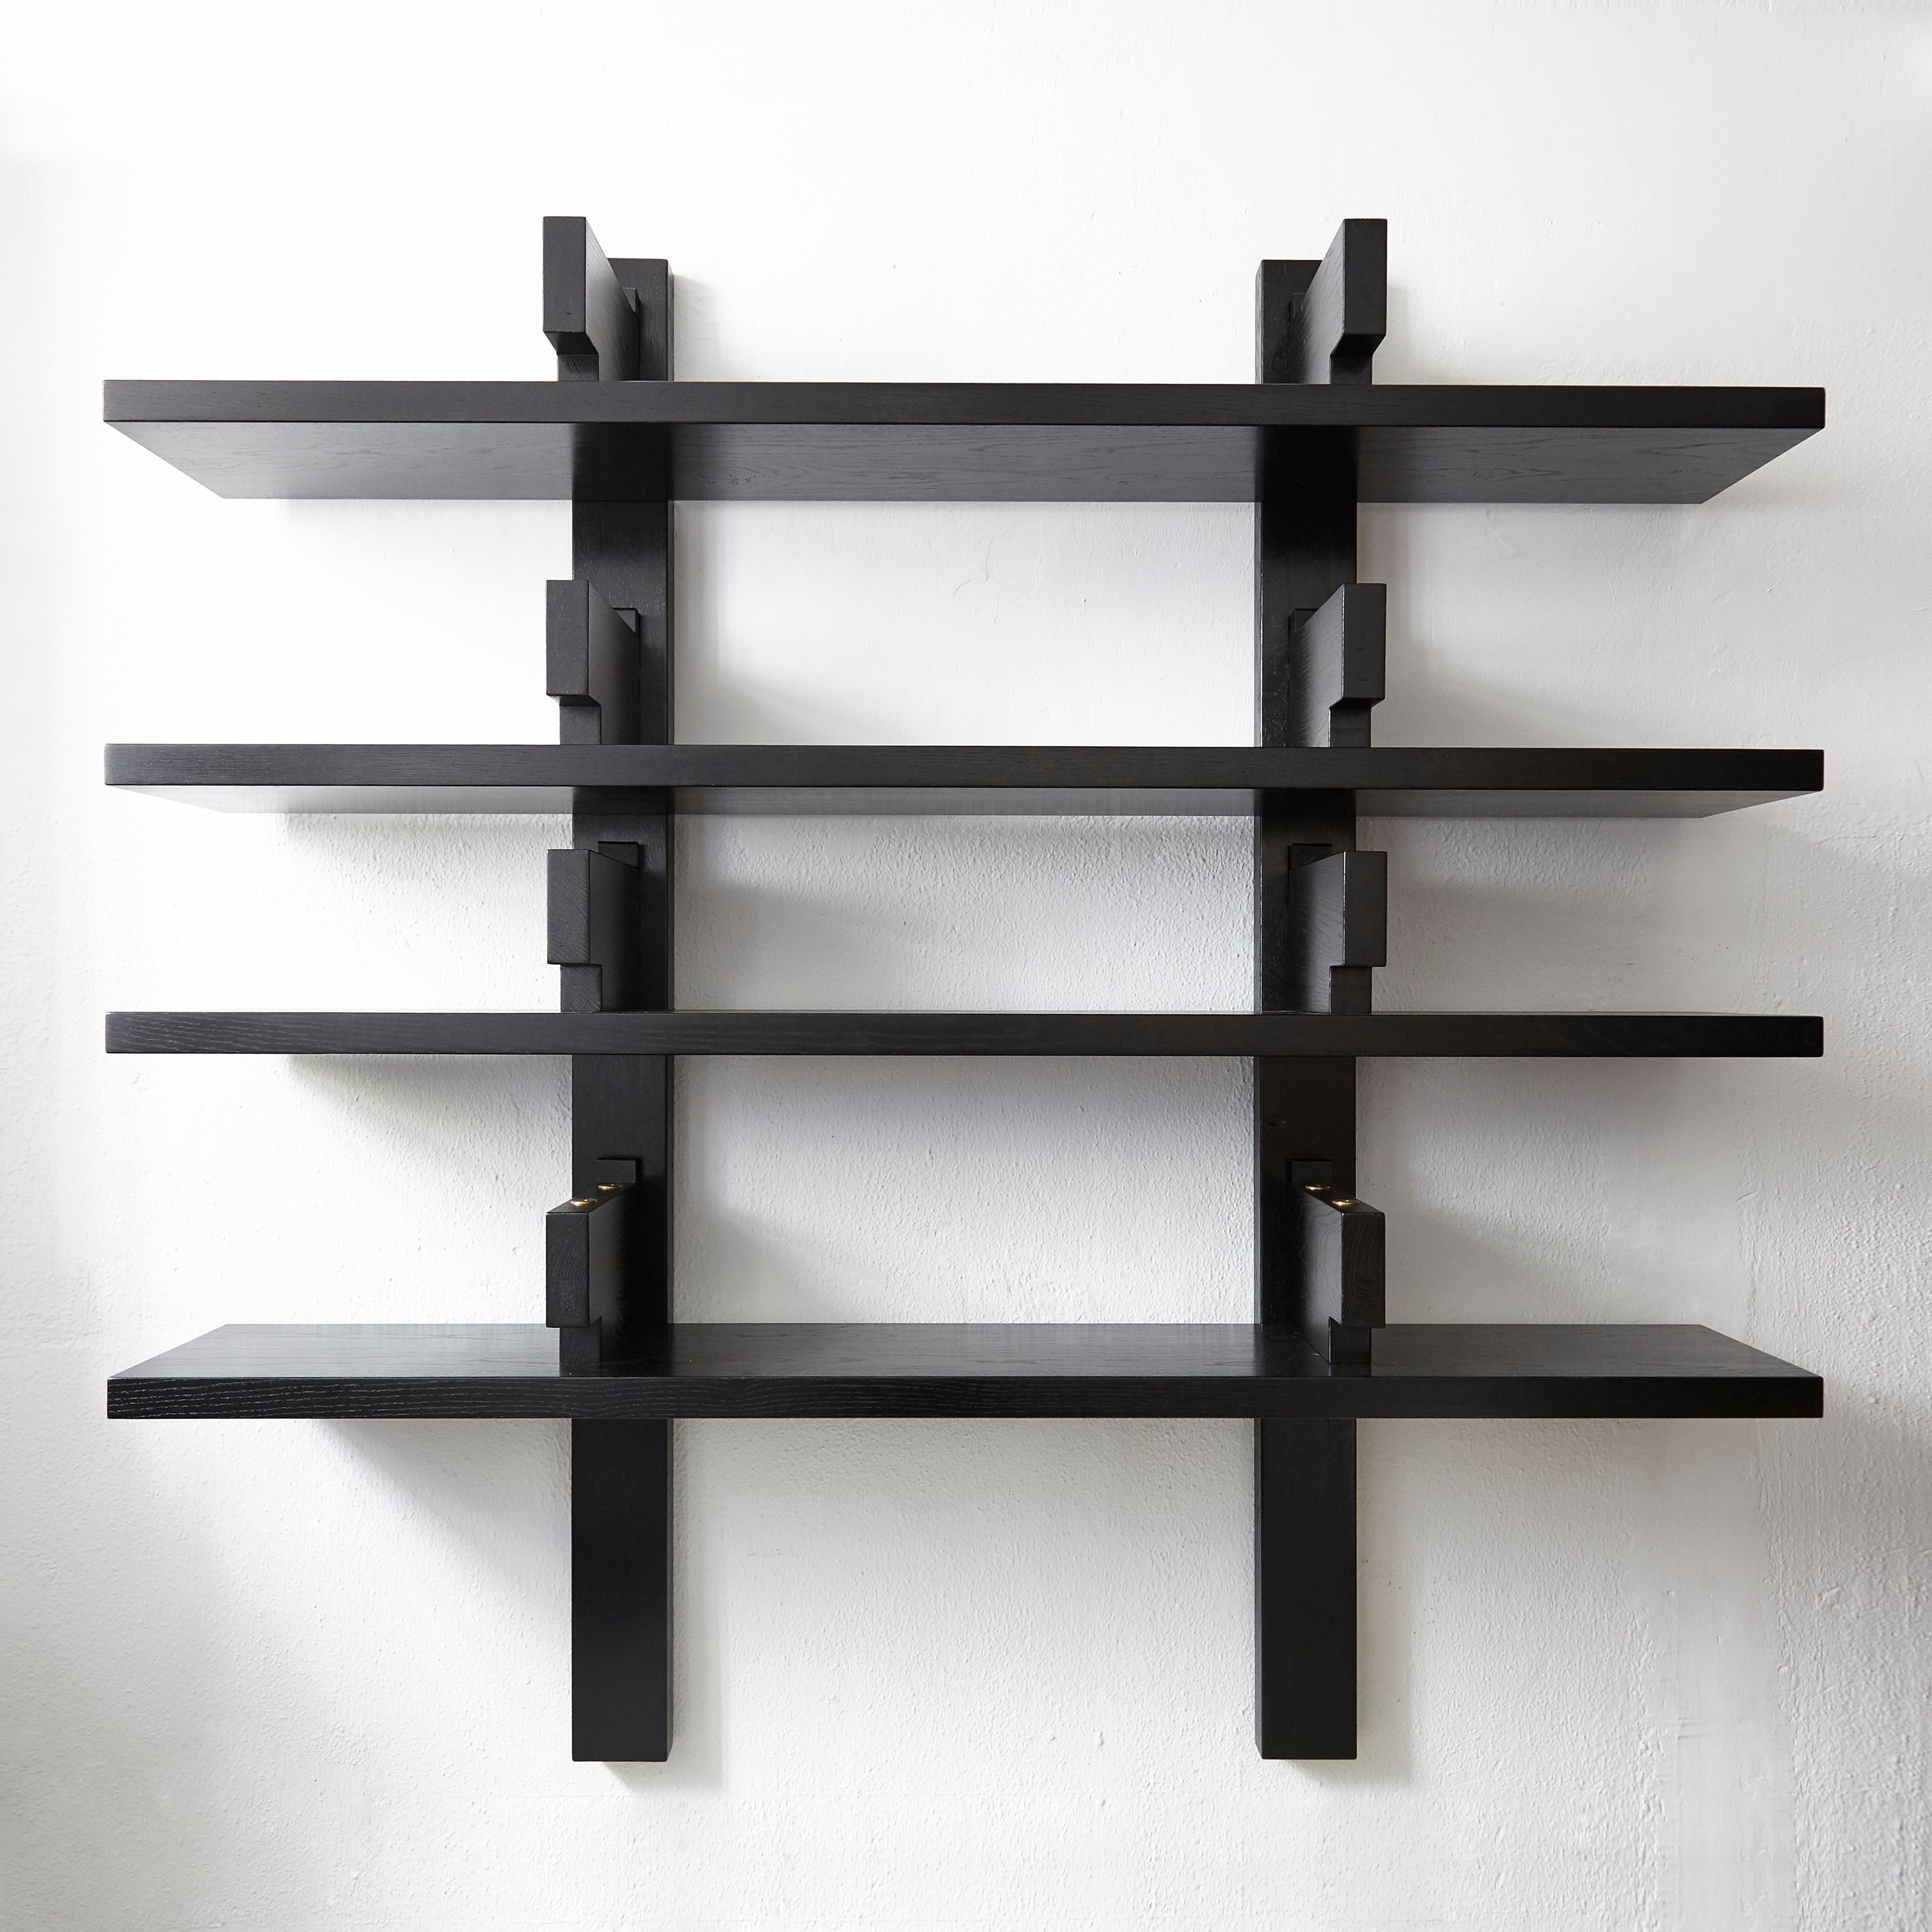 Special black edition of B17 wall-mounted book shelve designed by Pierre Chapo, circa 1970 in France.
Manufactured by Chapo Creation, 2019.
Oakwood.

In original condition, with wear consistent with age and use, preserving a beautiful